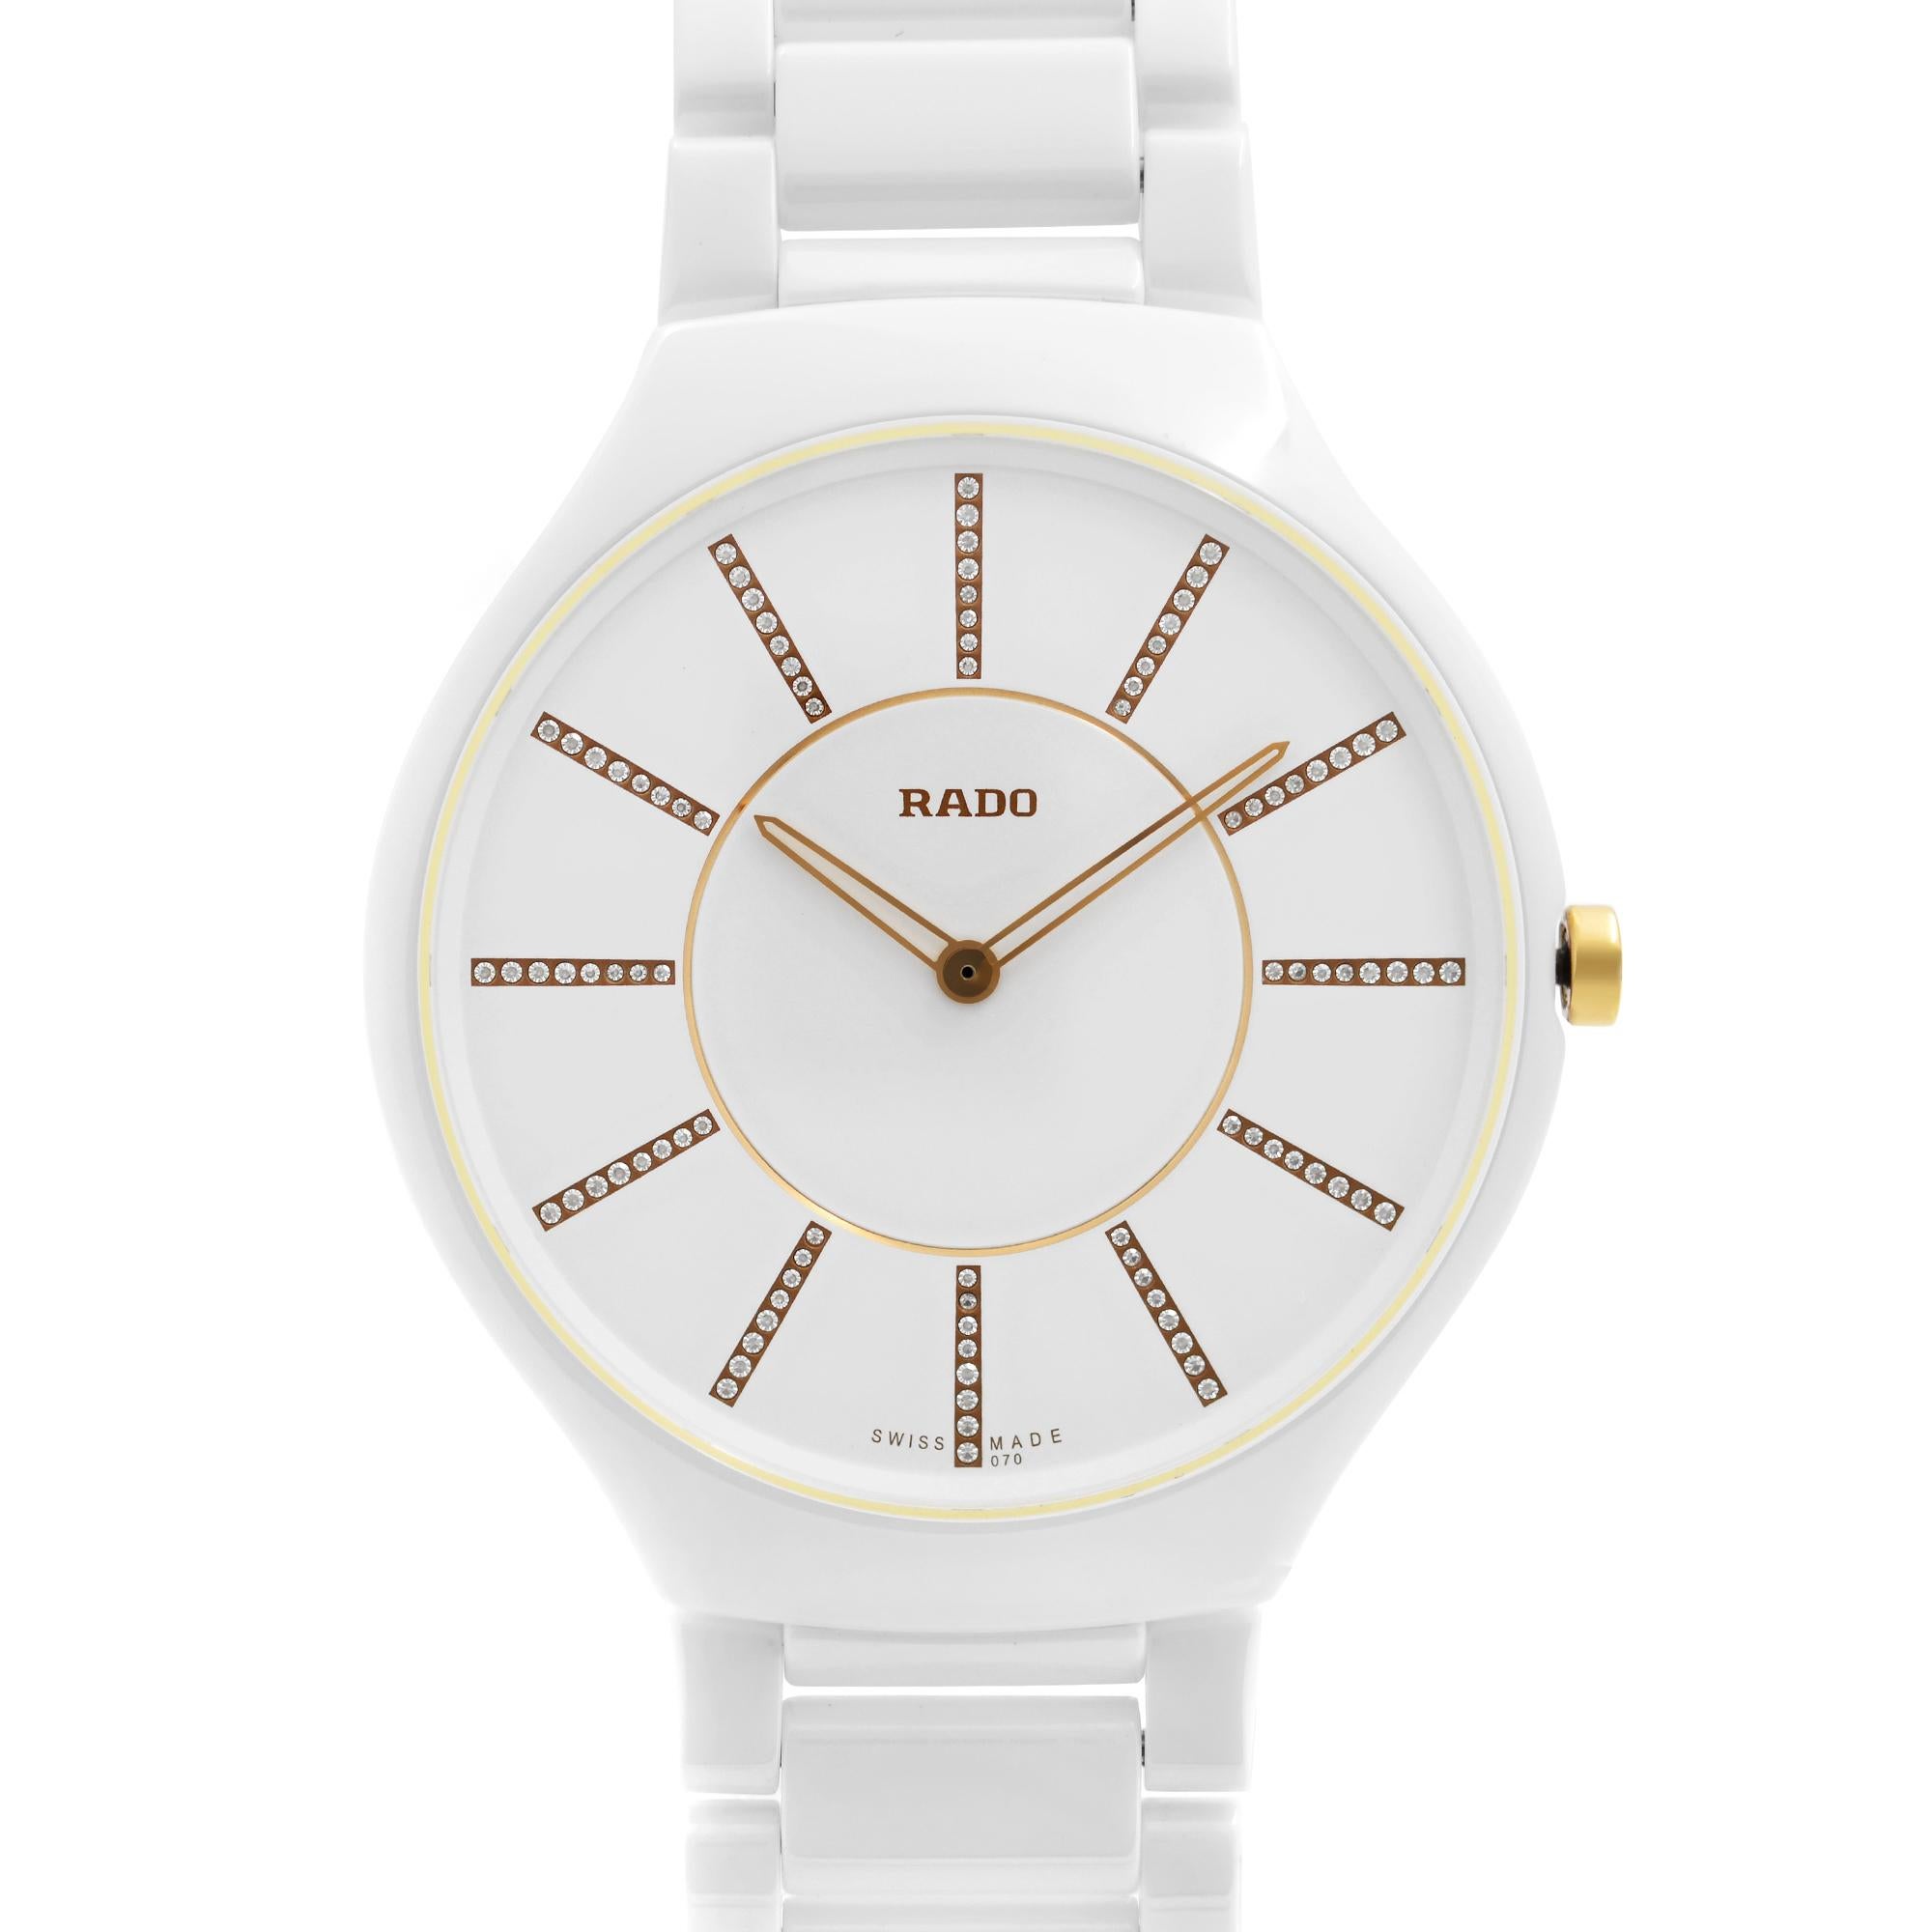 Pre owned Rado True Thinline Ceramic 39mm White Diamond Dial Quartz Unisex Watch R27957702. The Watch Has Minor Marks on the Case and Case Back. This Beautiful Timepiece Features: White Ceramic Case with a White Ceramic Bracelet. Fixed Ceramic